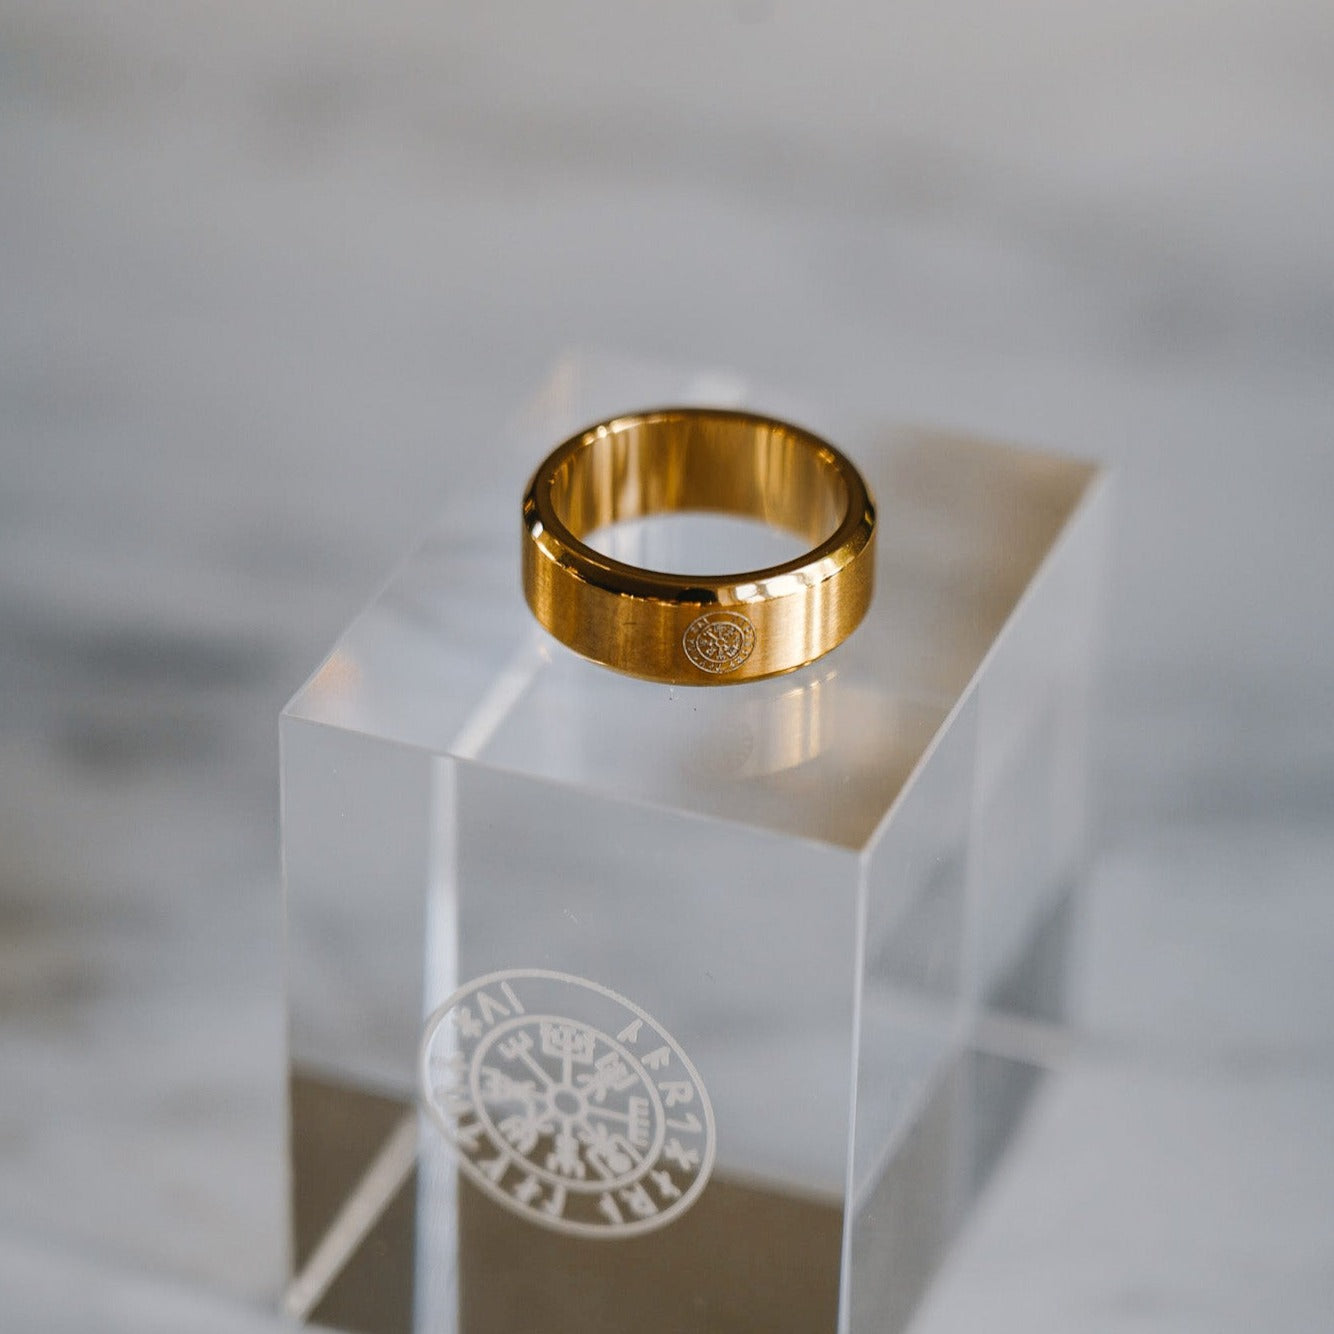 Siempre Vegvisir band - Gold-toned ring